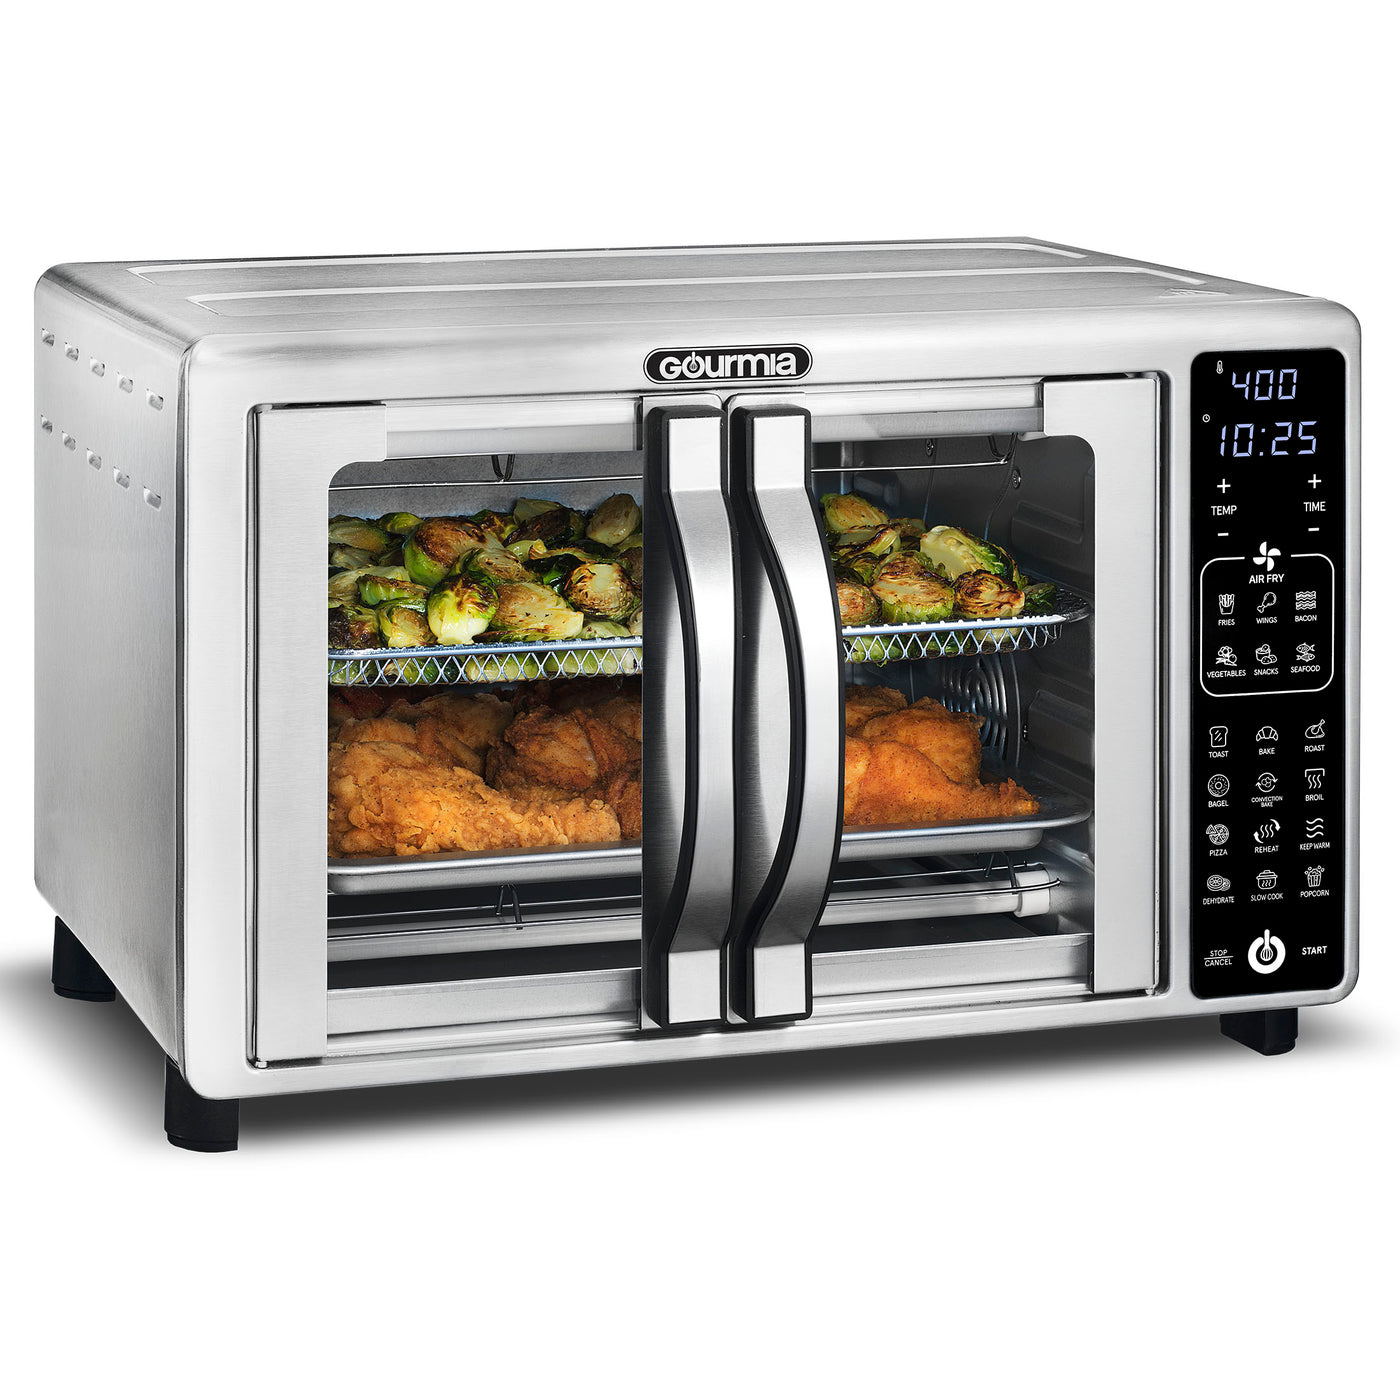 Gourmia Digital Stainless Steel Toaster Oven Air Fryer – Stainless Steel,  New